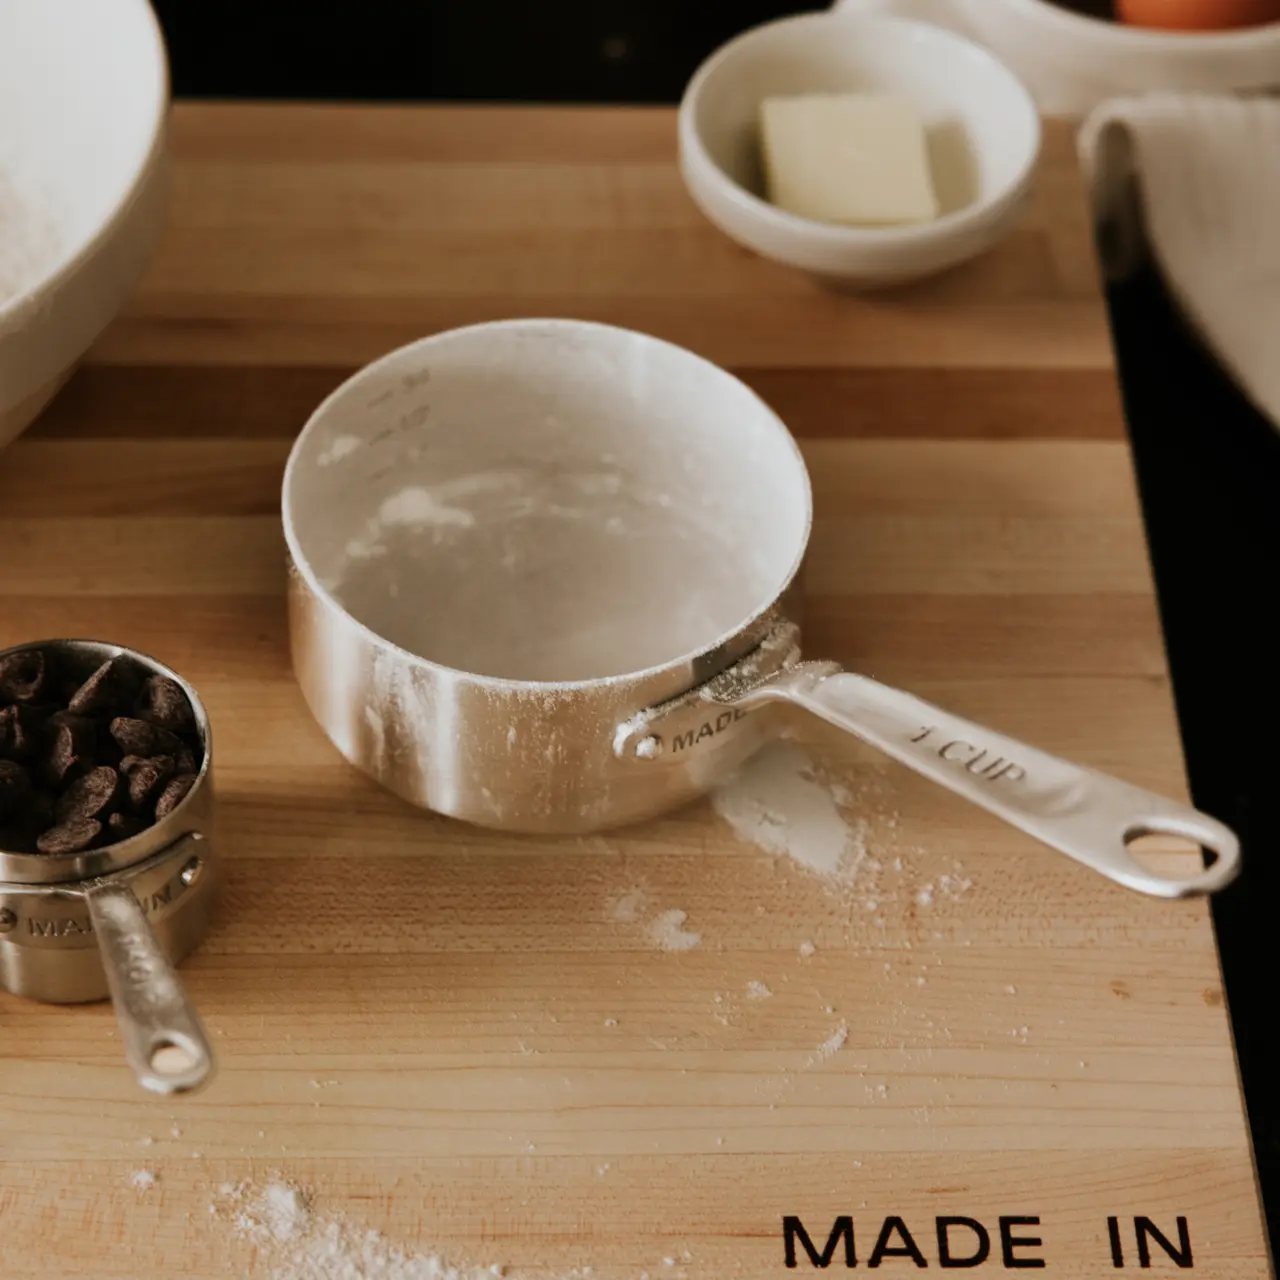 A dusting of flour covers a one-cup measuring scoop on a wooden cutting board amid various baking ingredients and utensils.